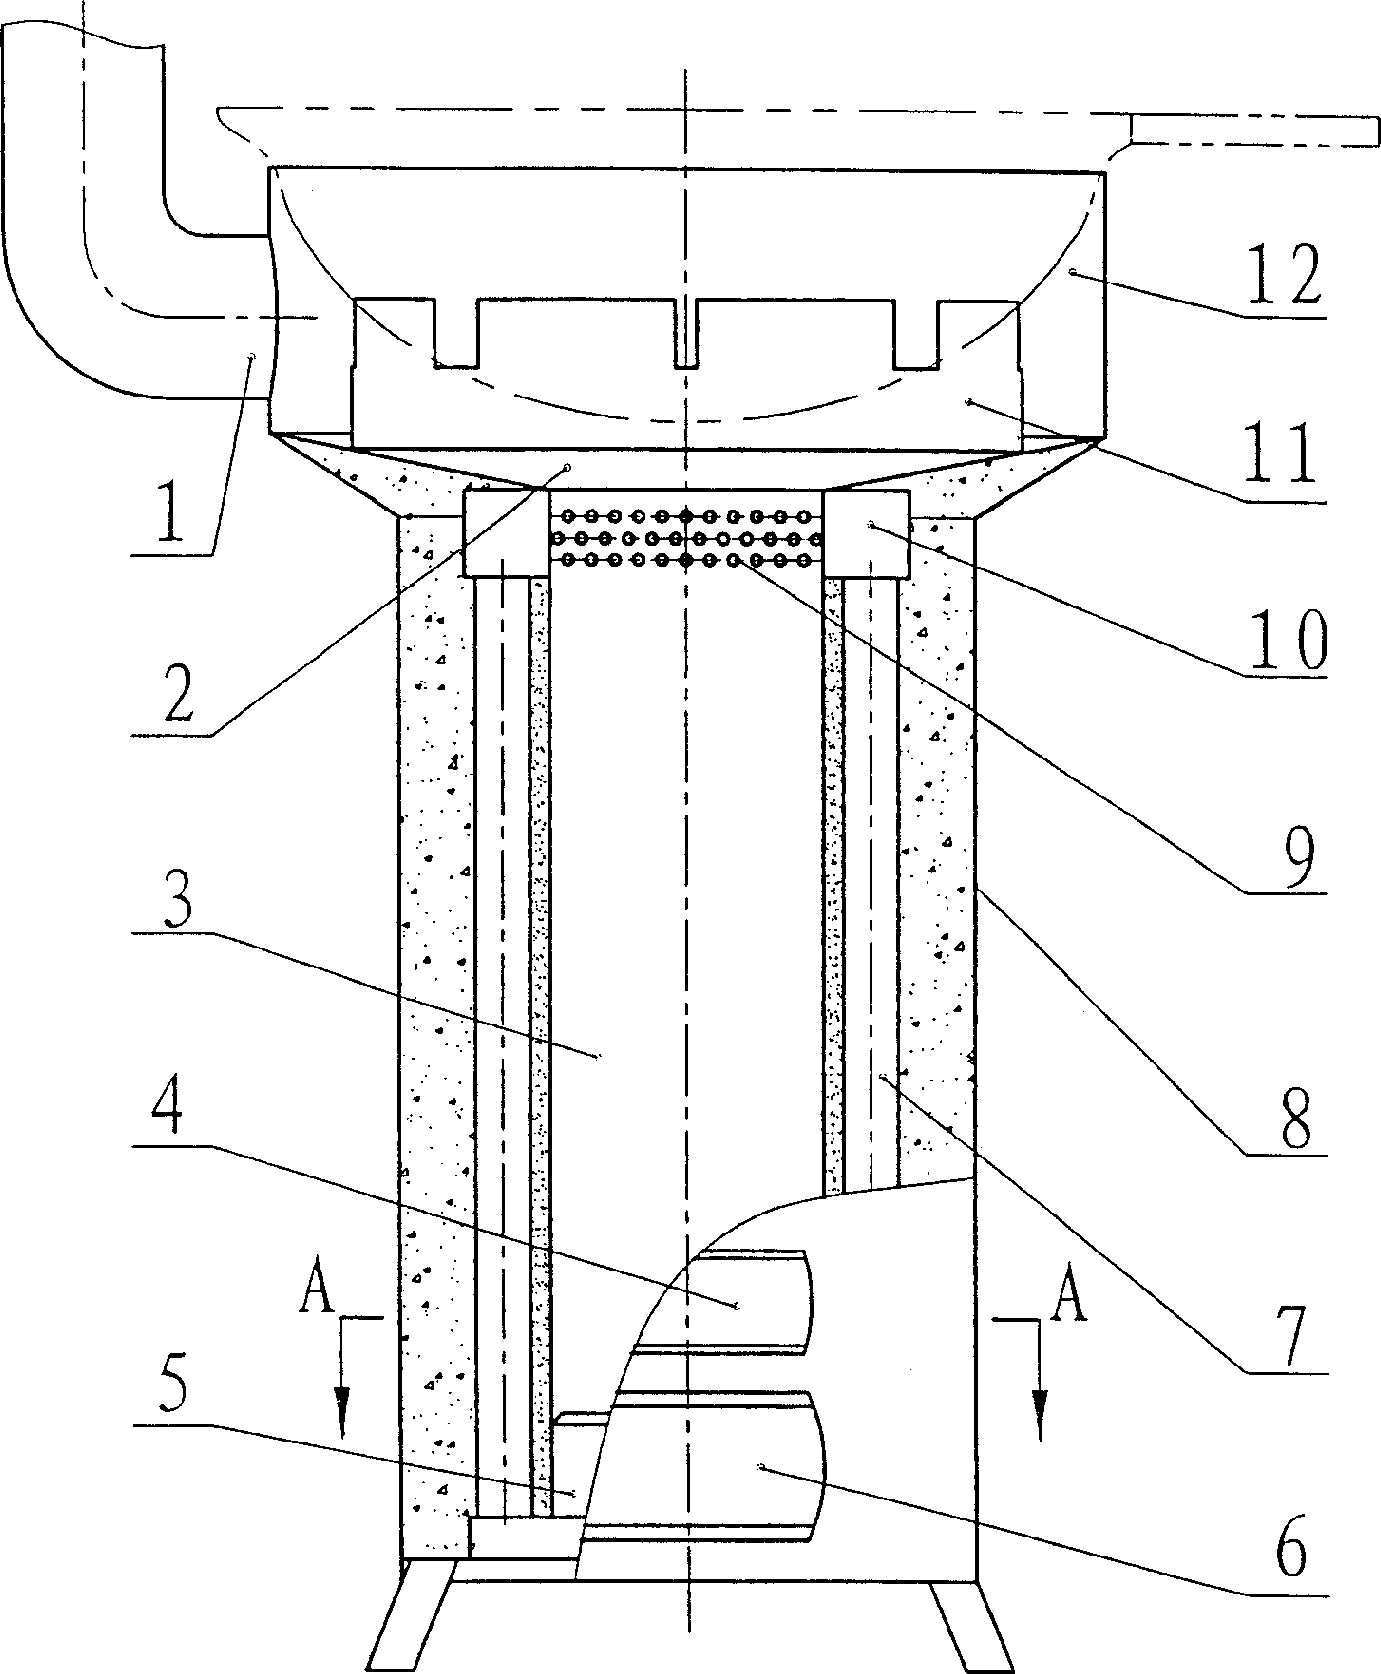 Domestic direct-firing gasification stove